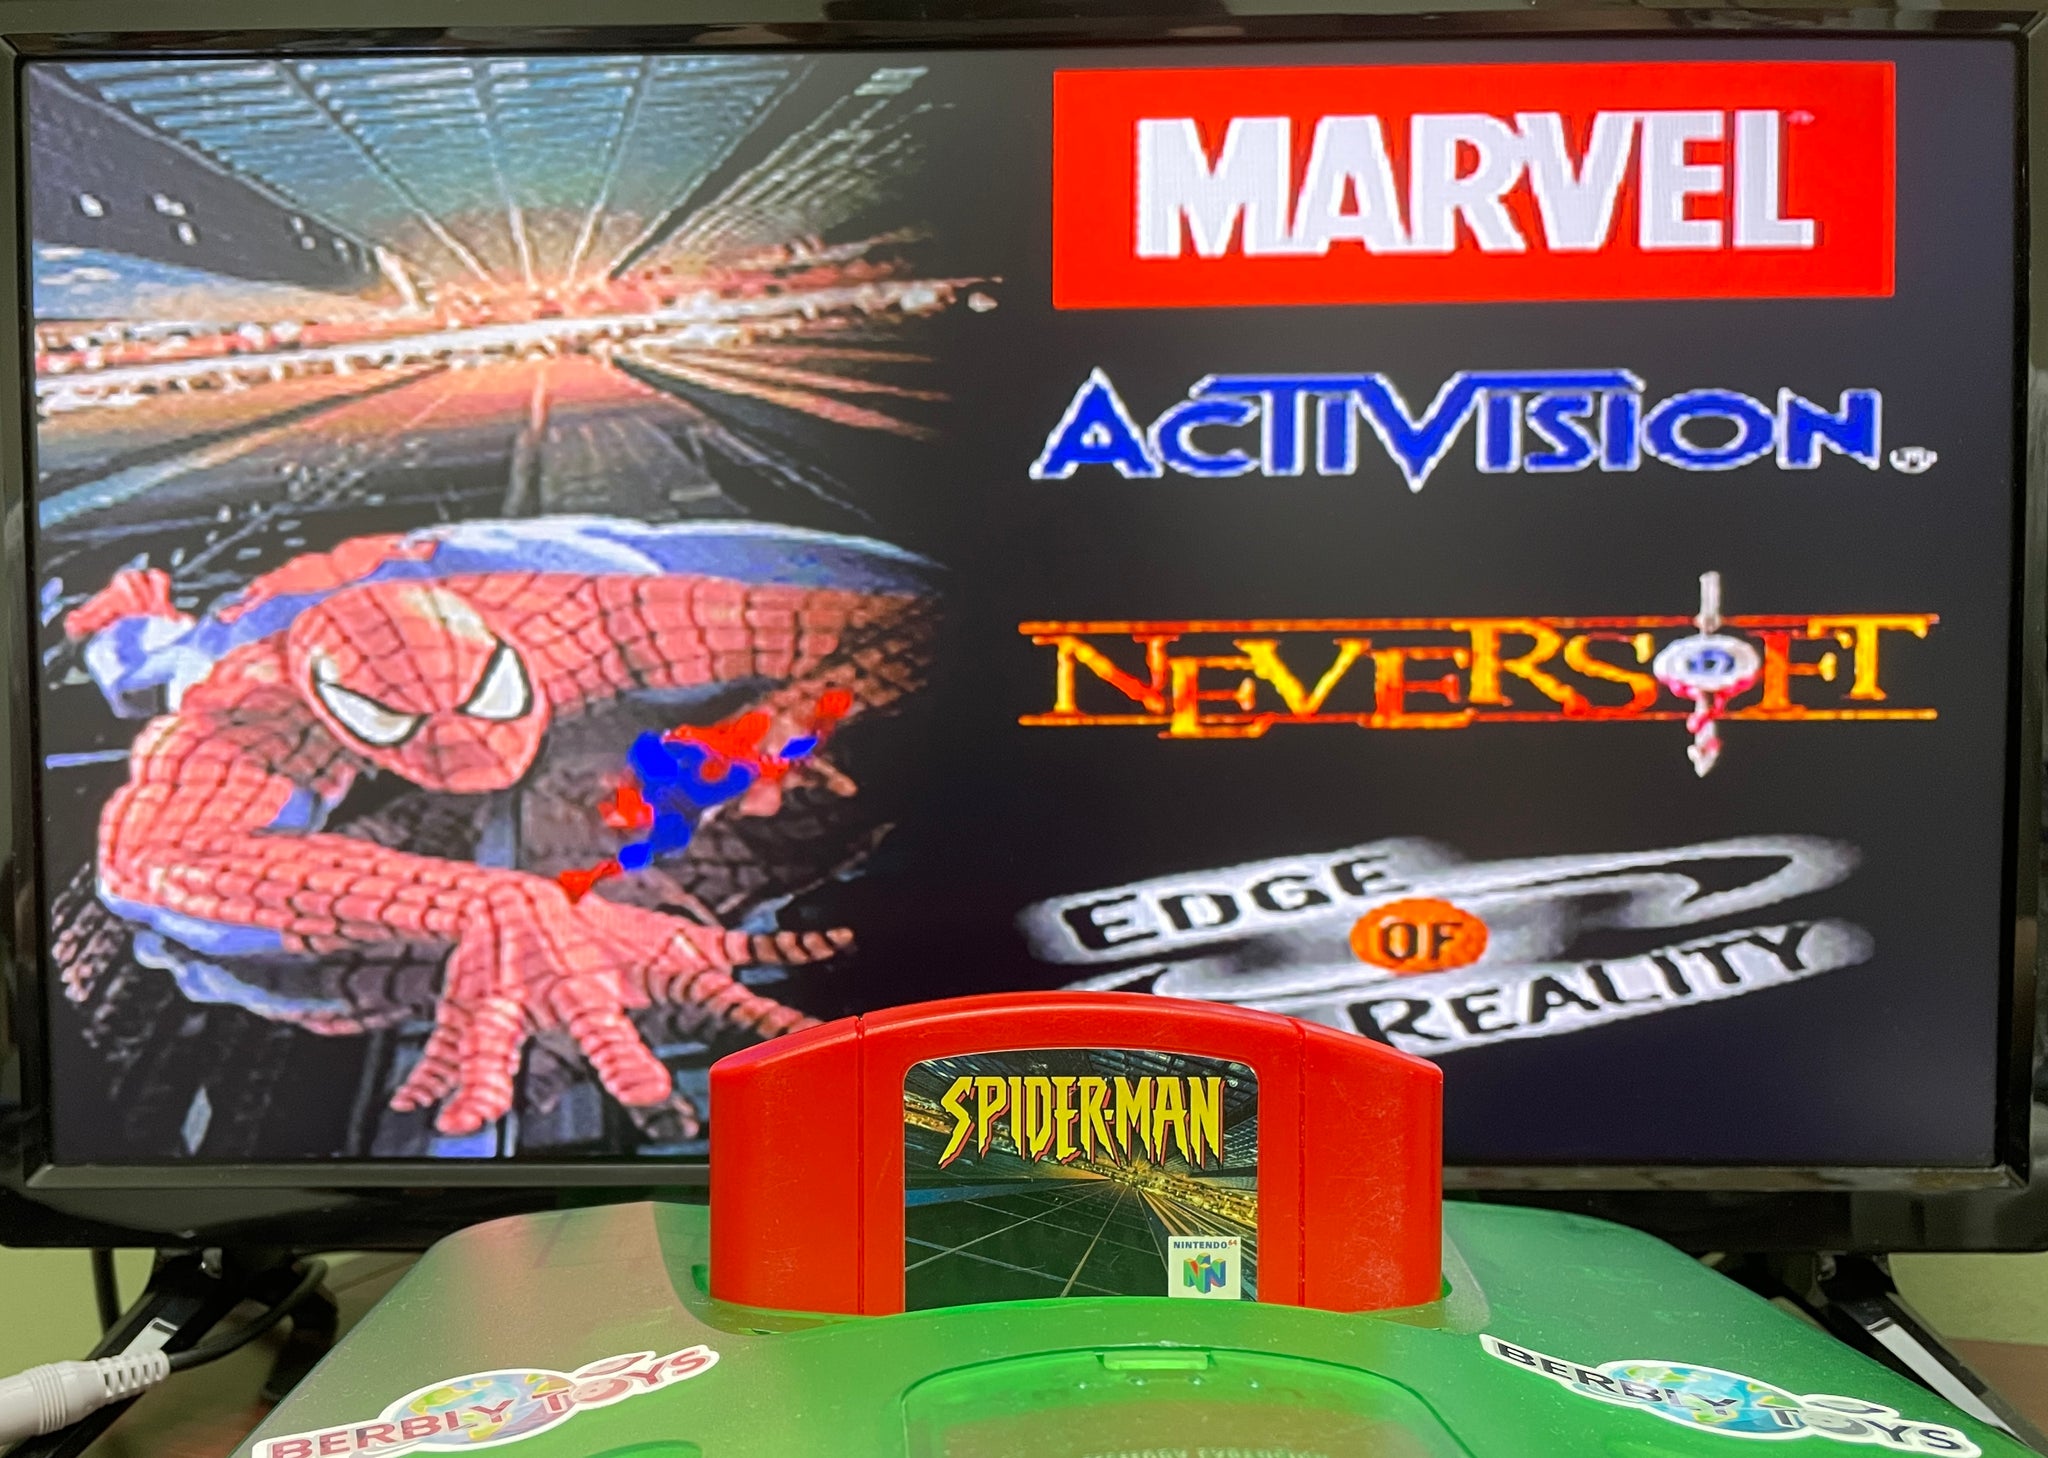 Play Nintendo 64 Spider-Man (USA) Online in your browser